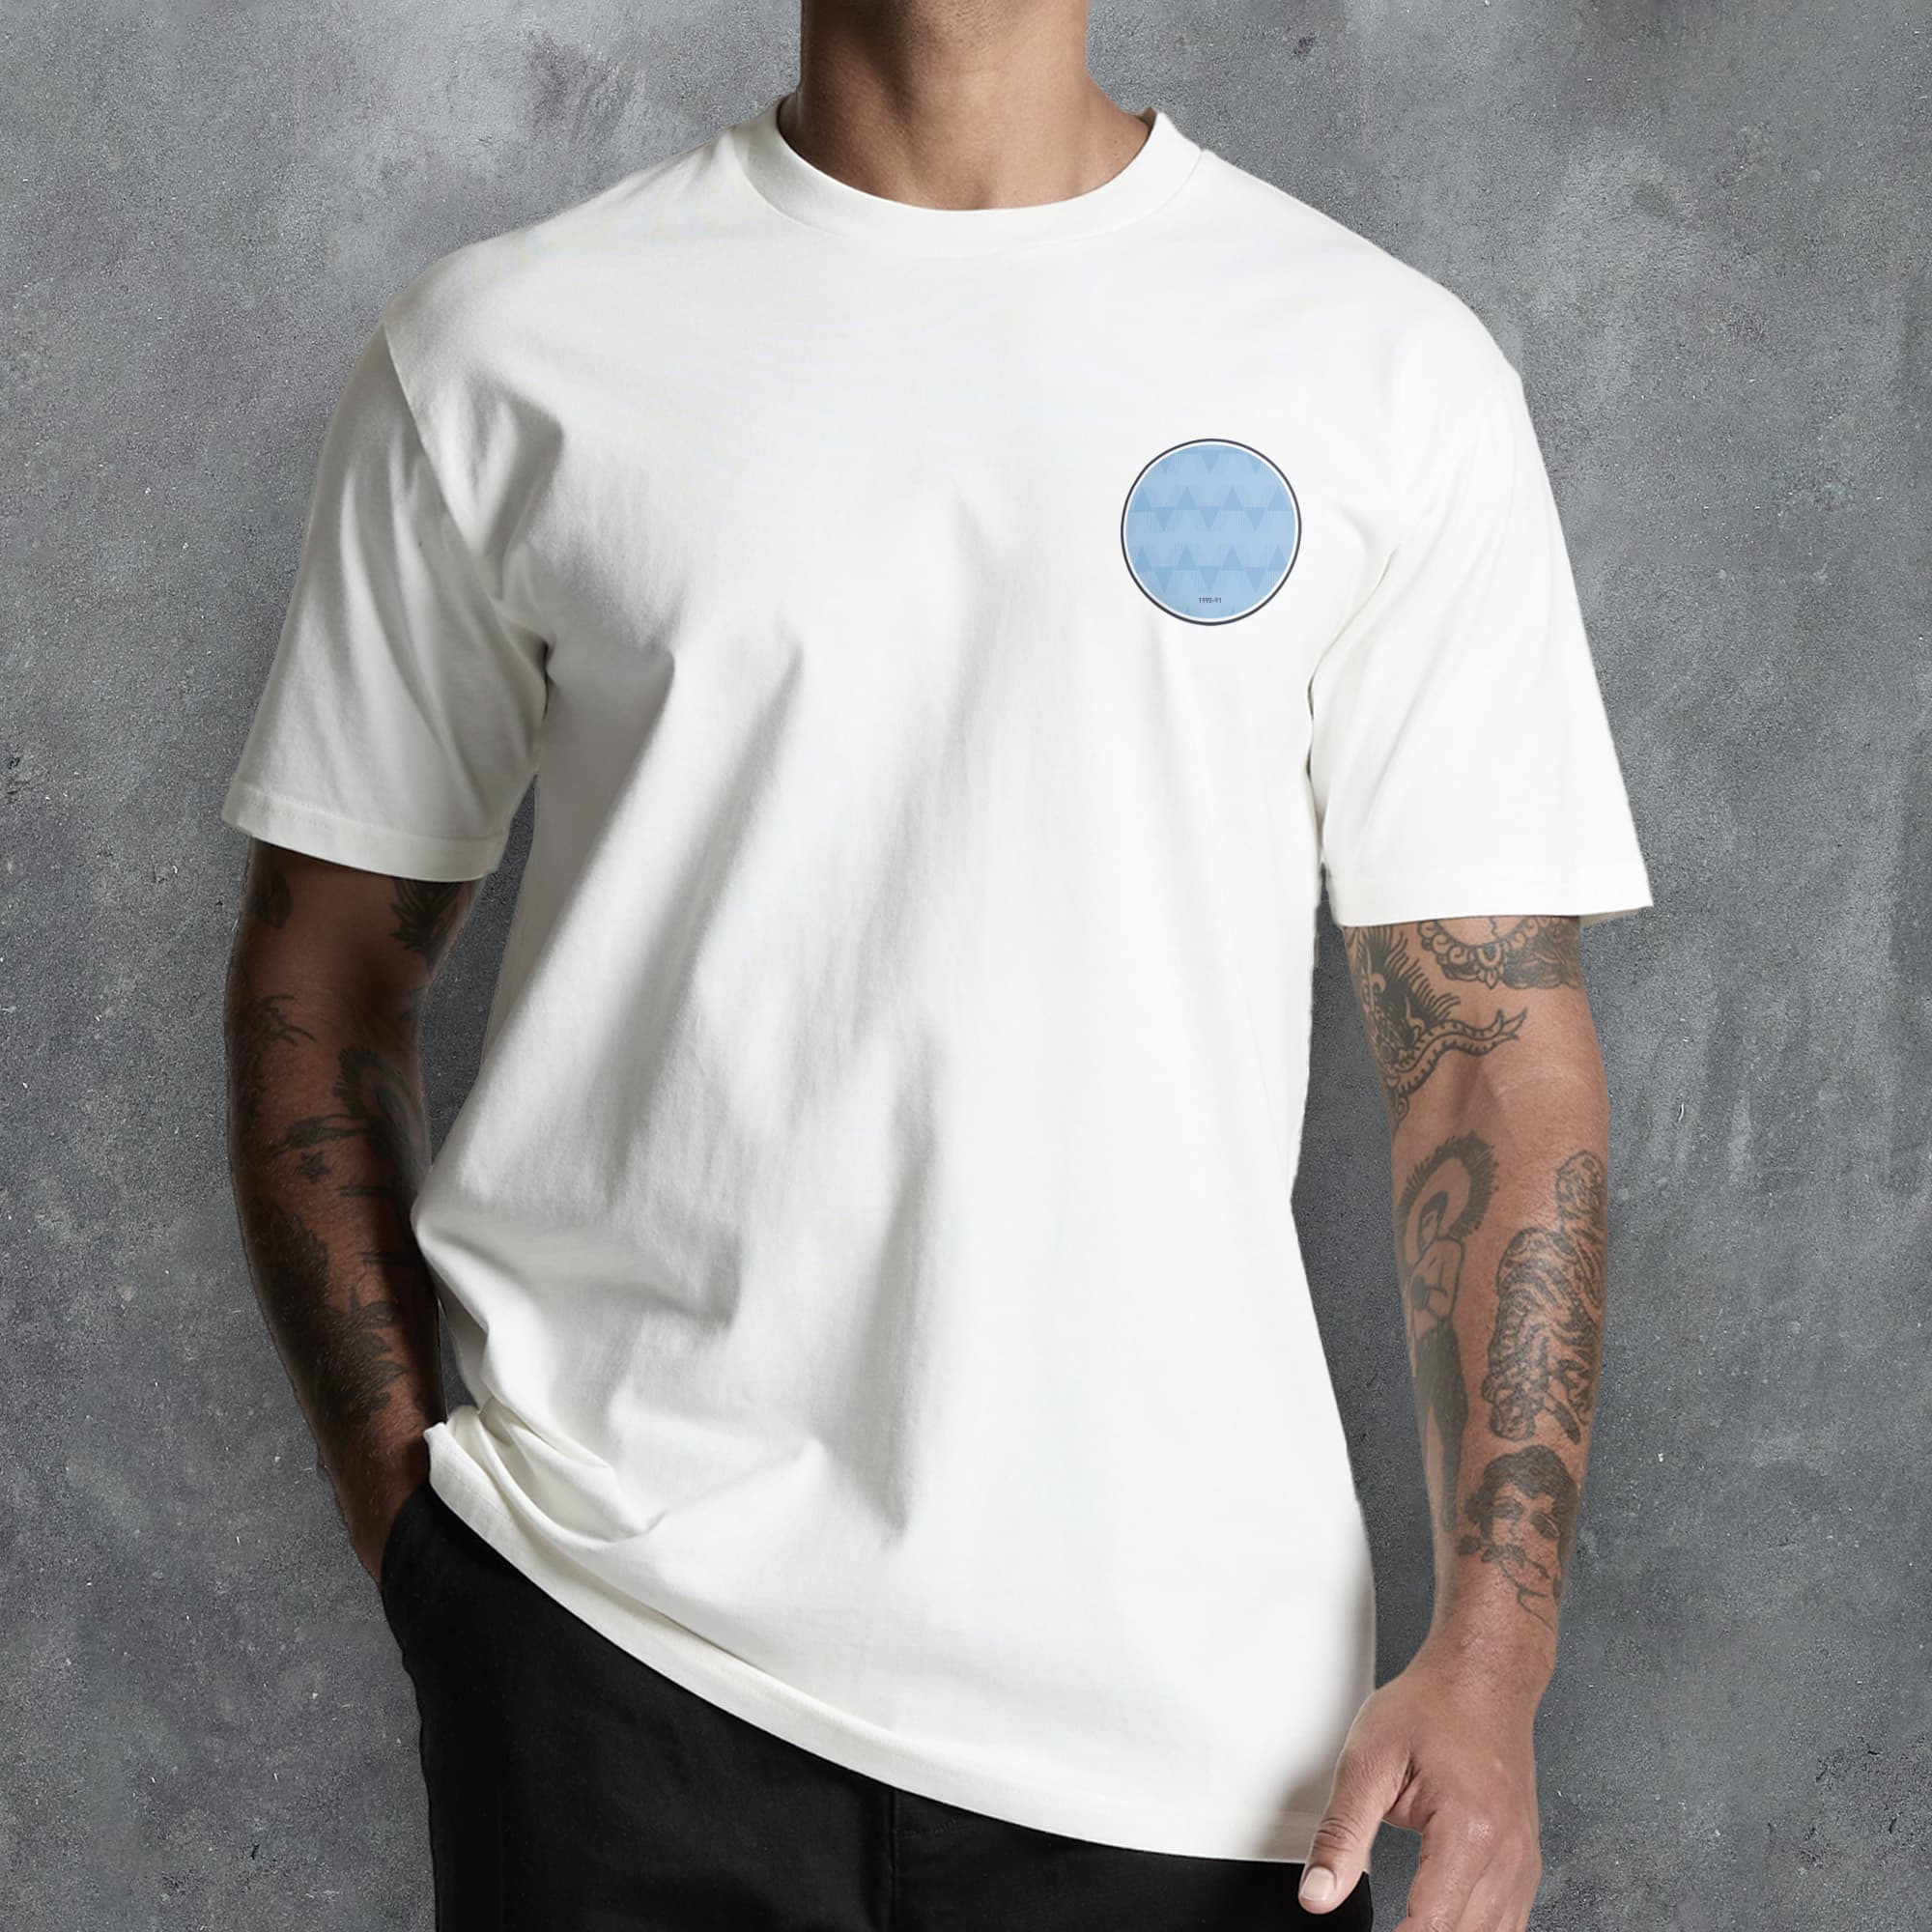 a man wearing a white t - shirt with a blue circle on it